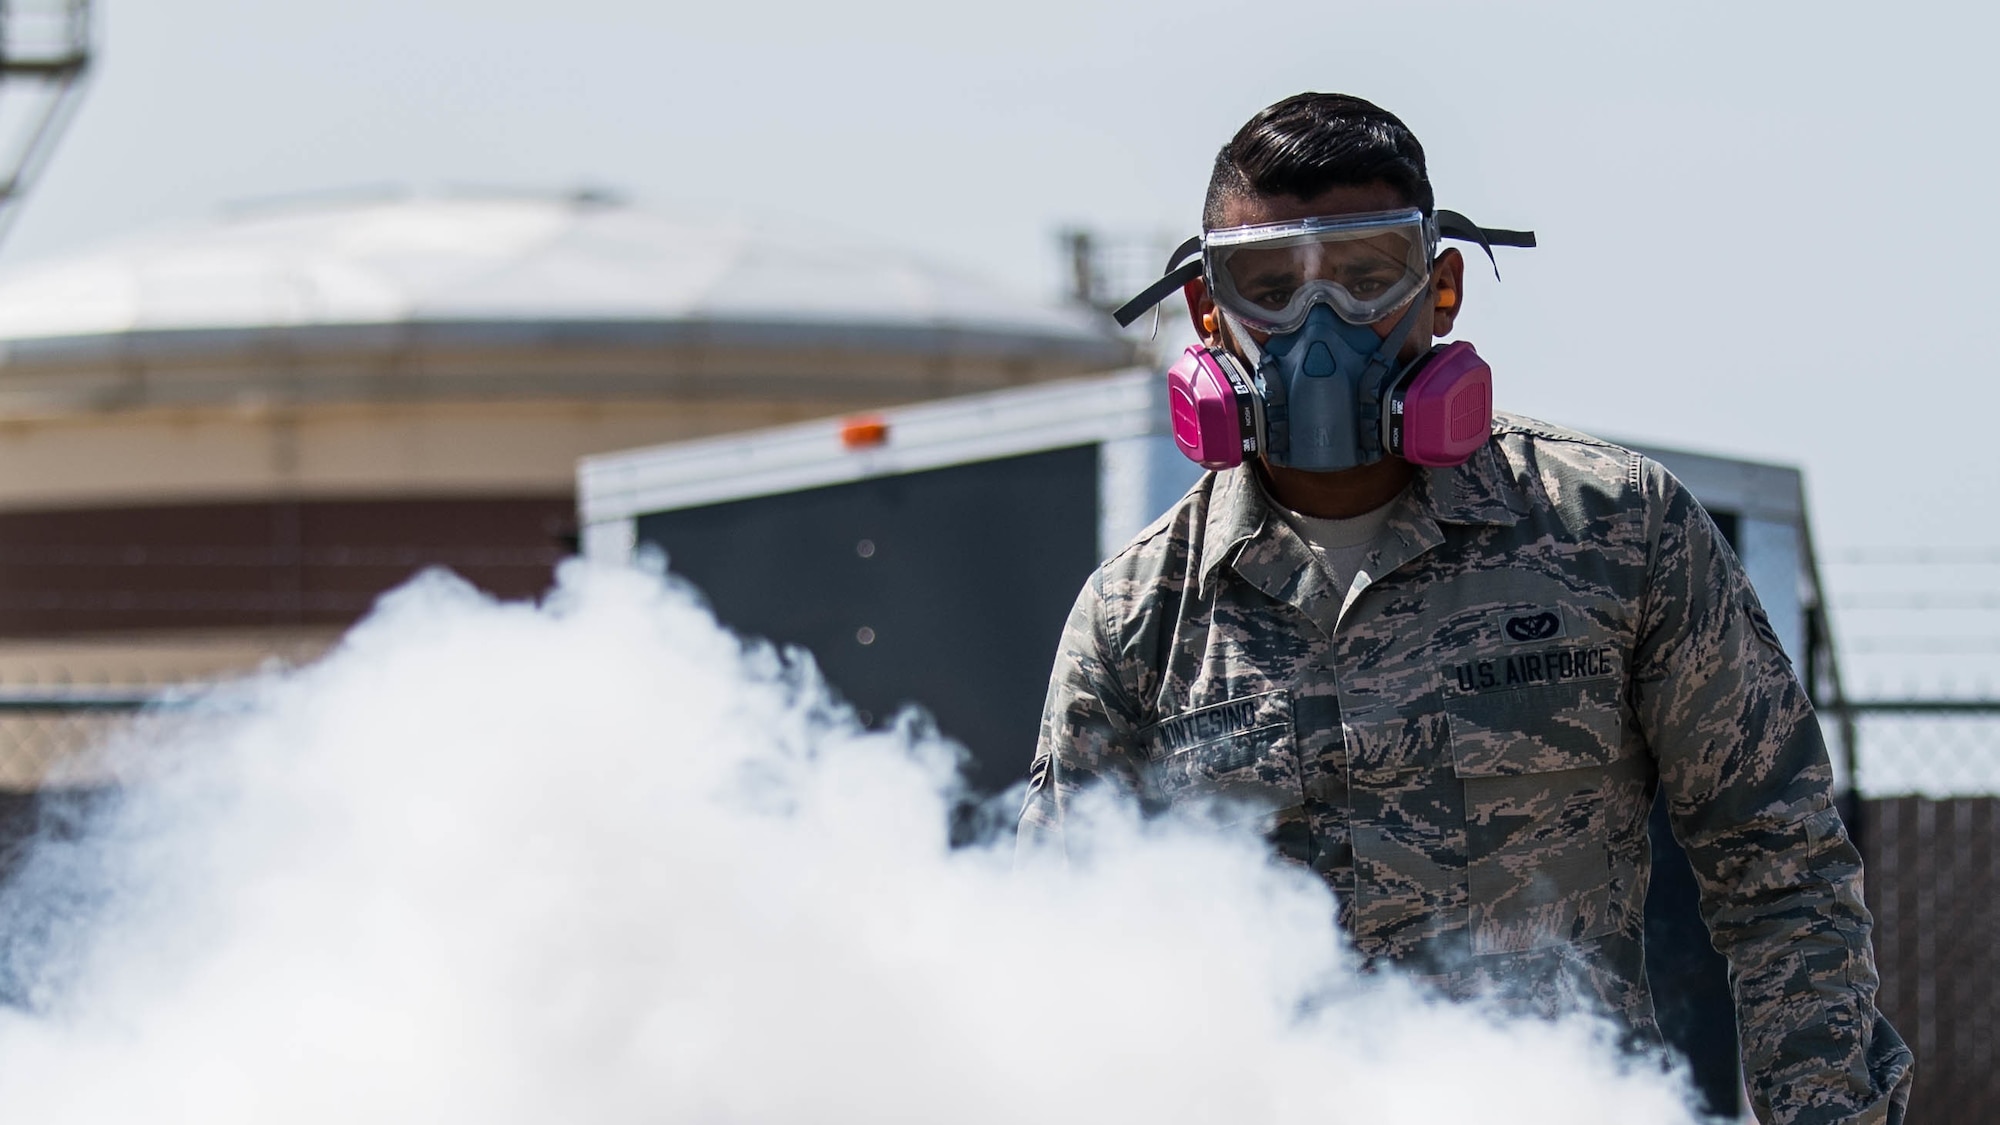 Airman 1st Class Alberto Montesino, a 2nd Civil Engineer Squadron pest management apprentice, deploys a mosquito fogger at Barksdale Air Force Base, June 25, 2019. The 2nd CES pest management shop regularly uses the fogger for mosquitoes, as well as tests for mosquito-borne diseases such as the West Nile virus and the Zika virus. (U.S. Air Force photo by Airman Jacob B. Wrightsman)